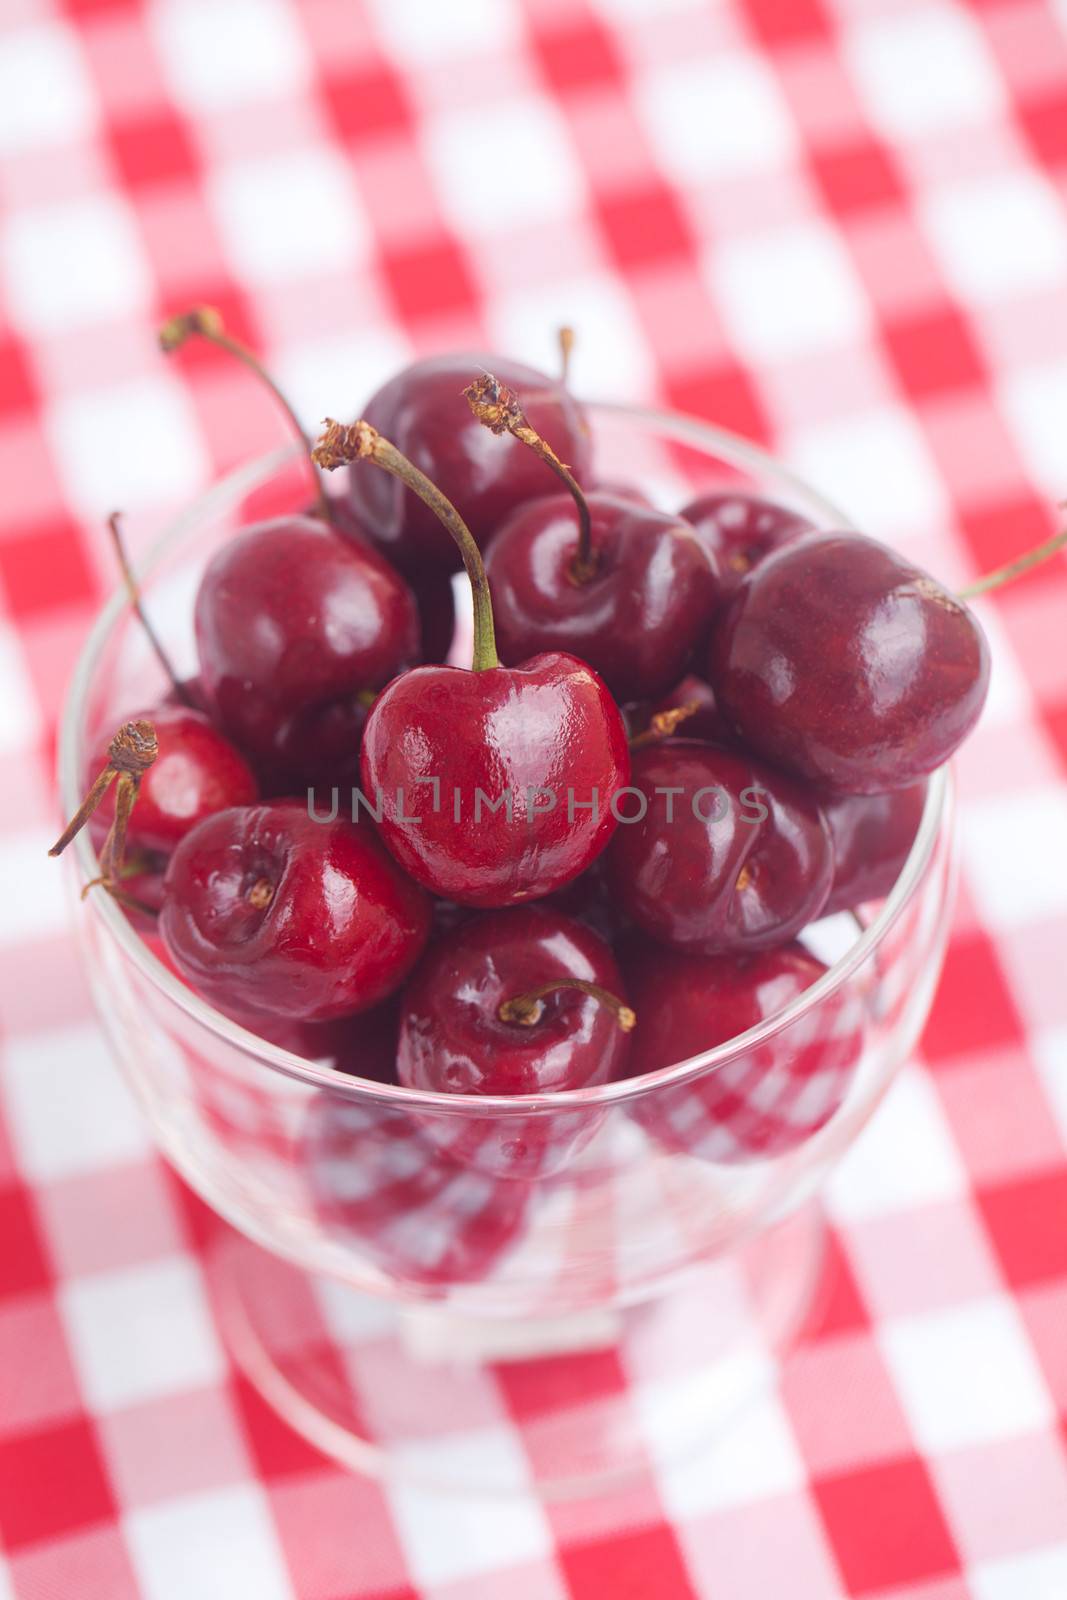 Cherries in a glass bowl on checkered fabric by jannyjus